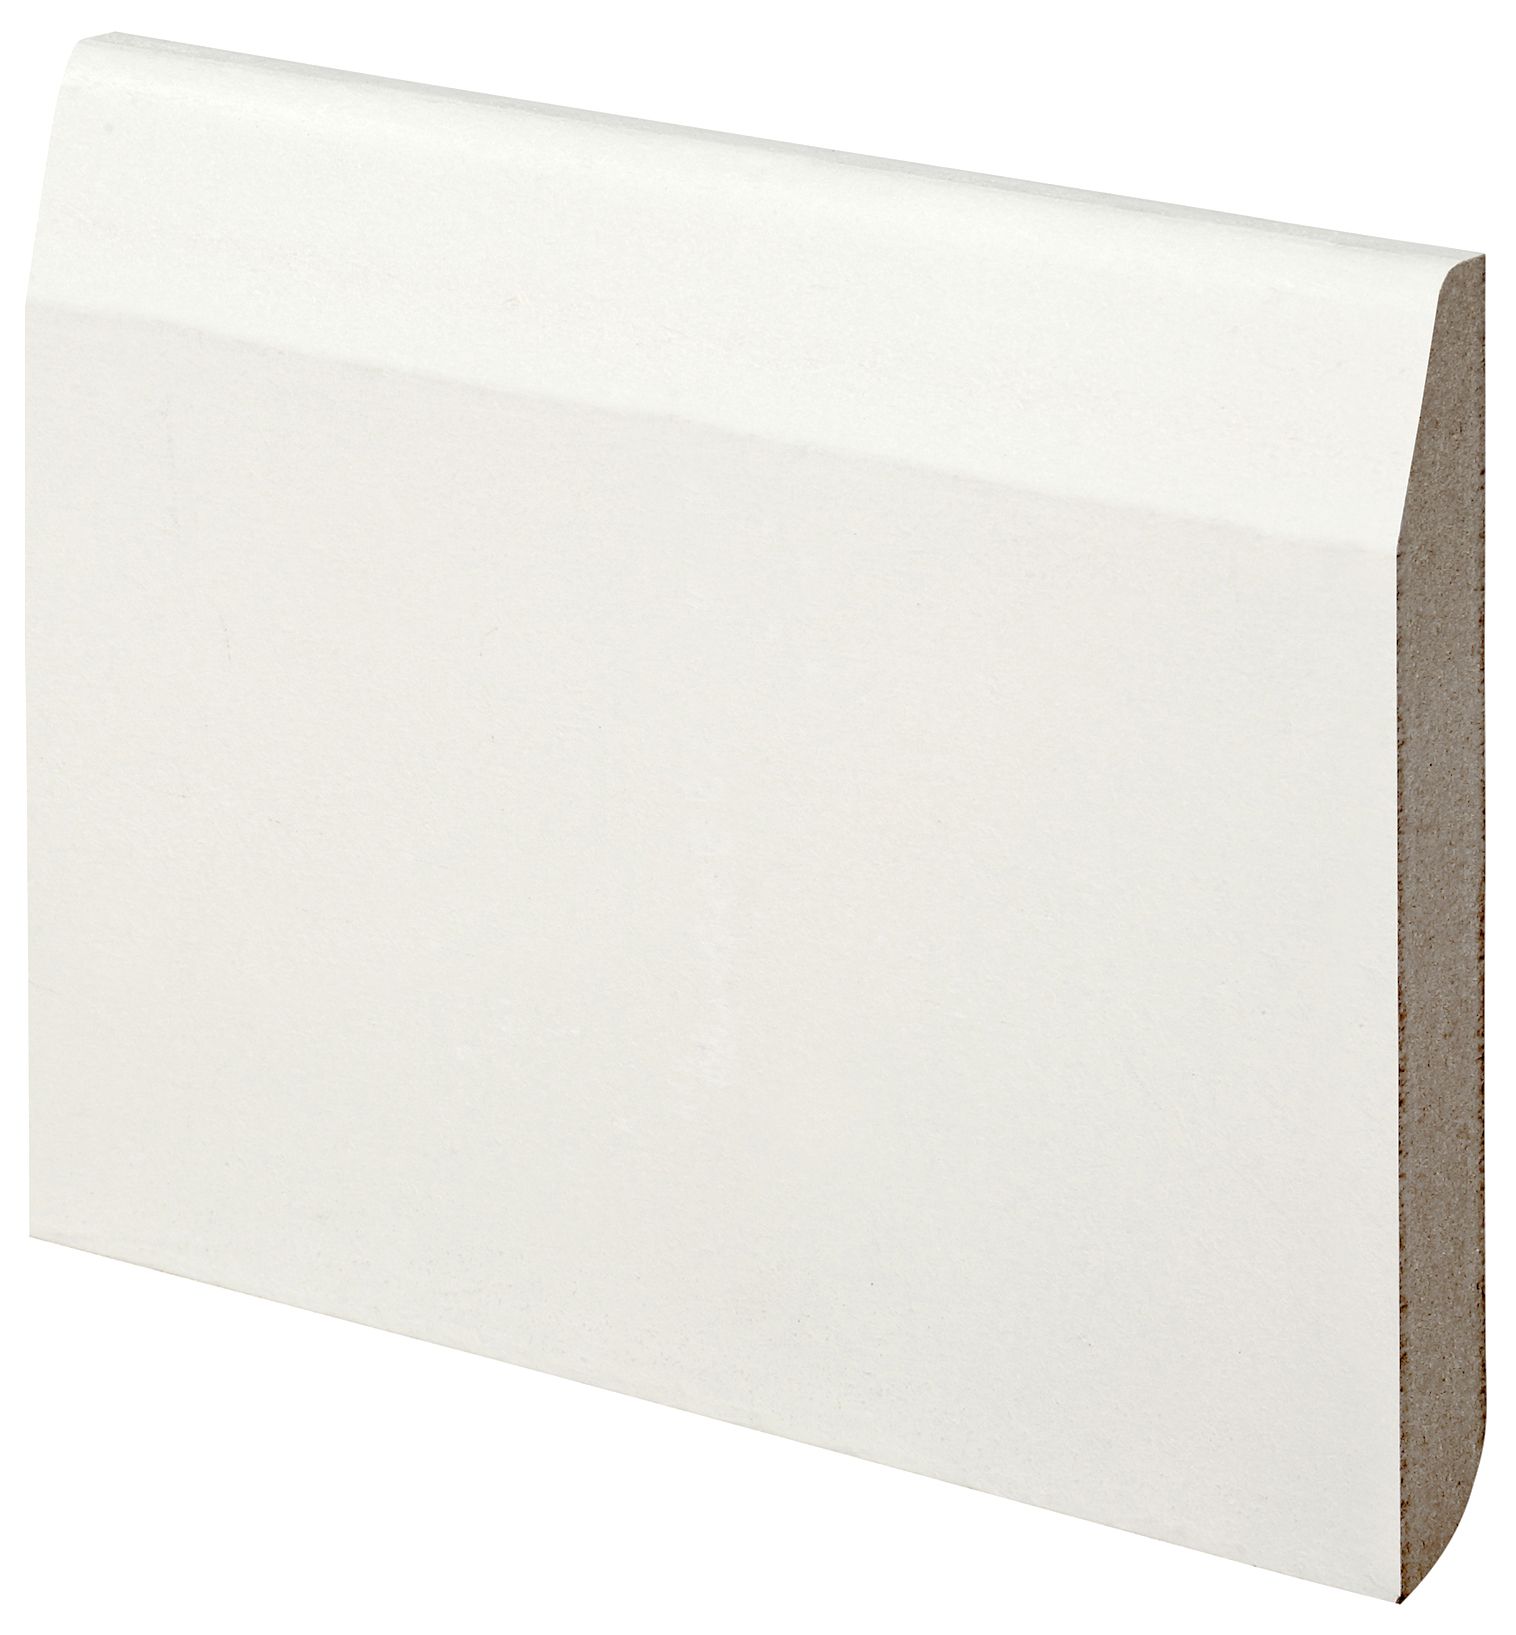 Image of Wickes Dual Purpose Chamfered/Bullnose Primed MDF Skirting - 18 x 144 x 3660mm